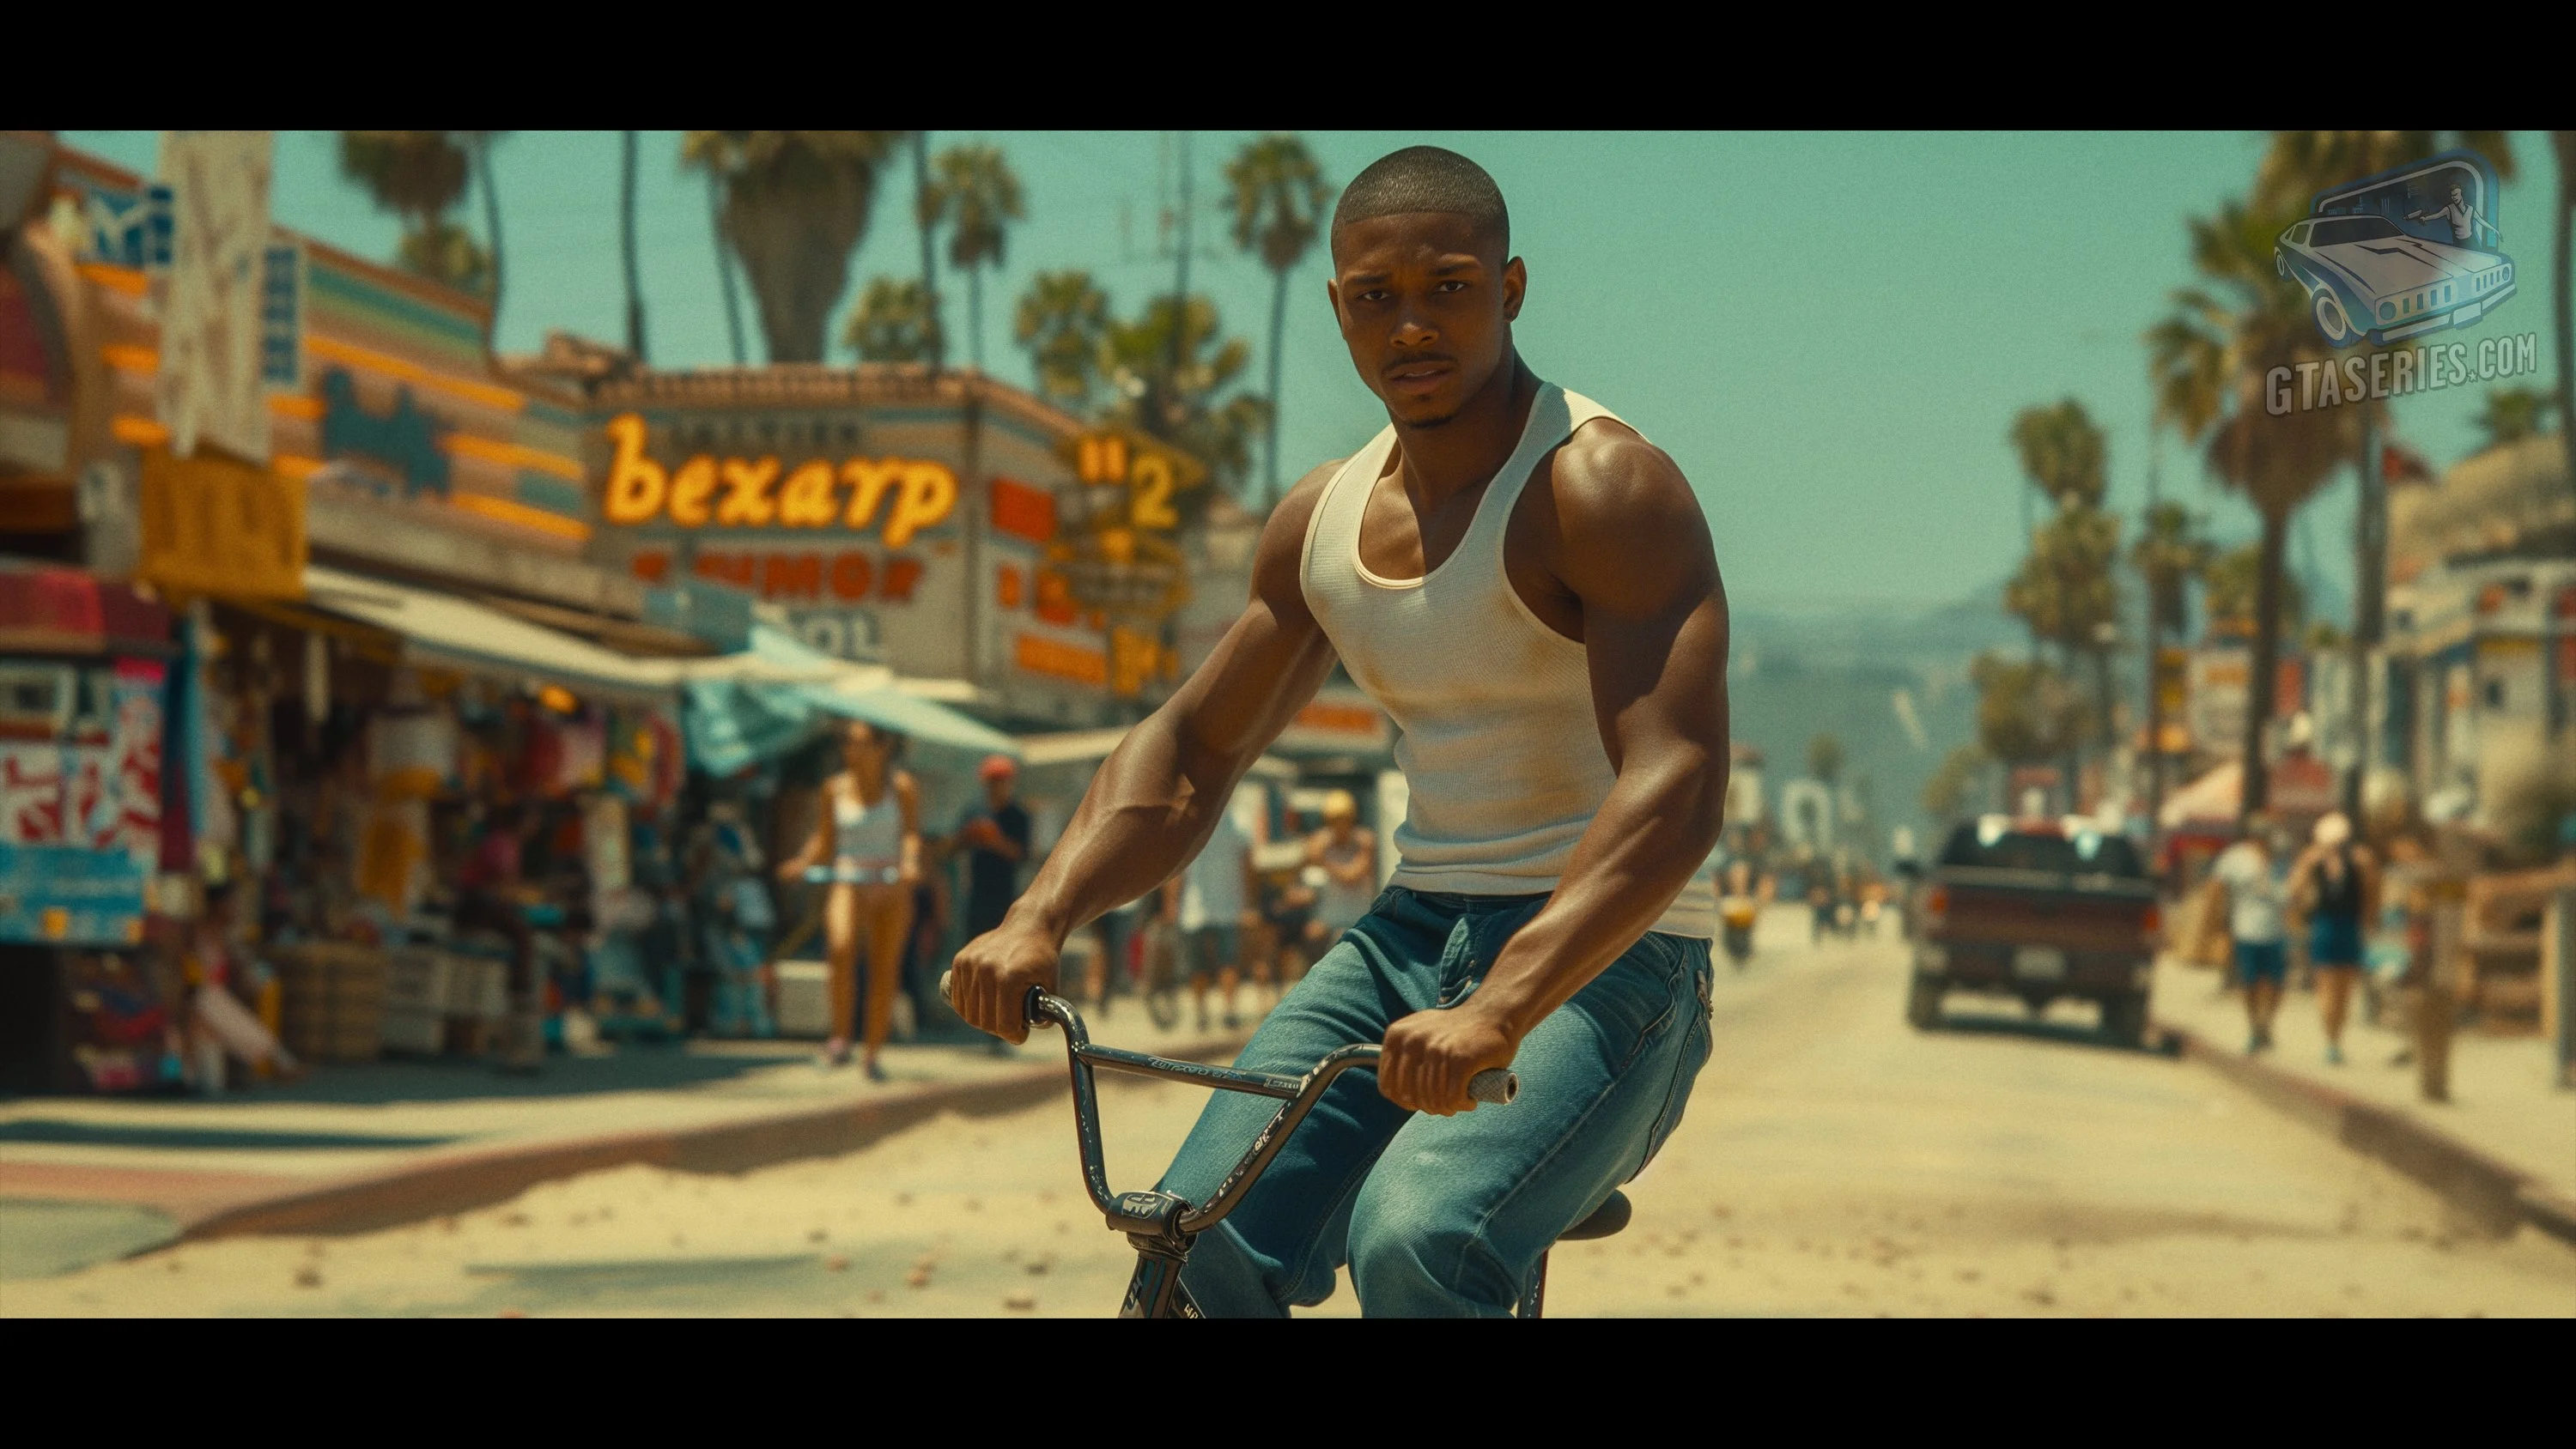 The neural network showed what a film based on GTA: San Andreas could look like